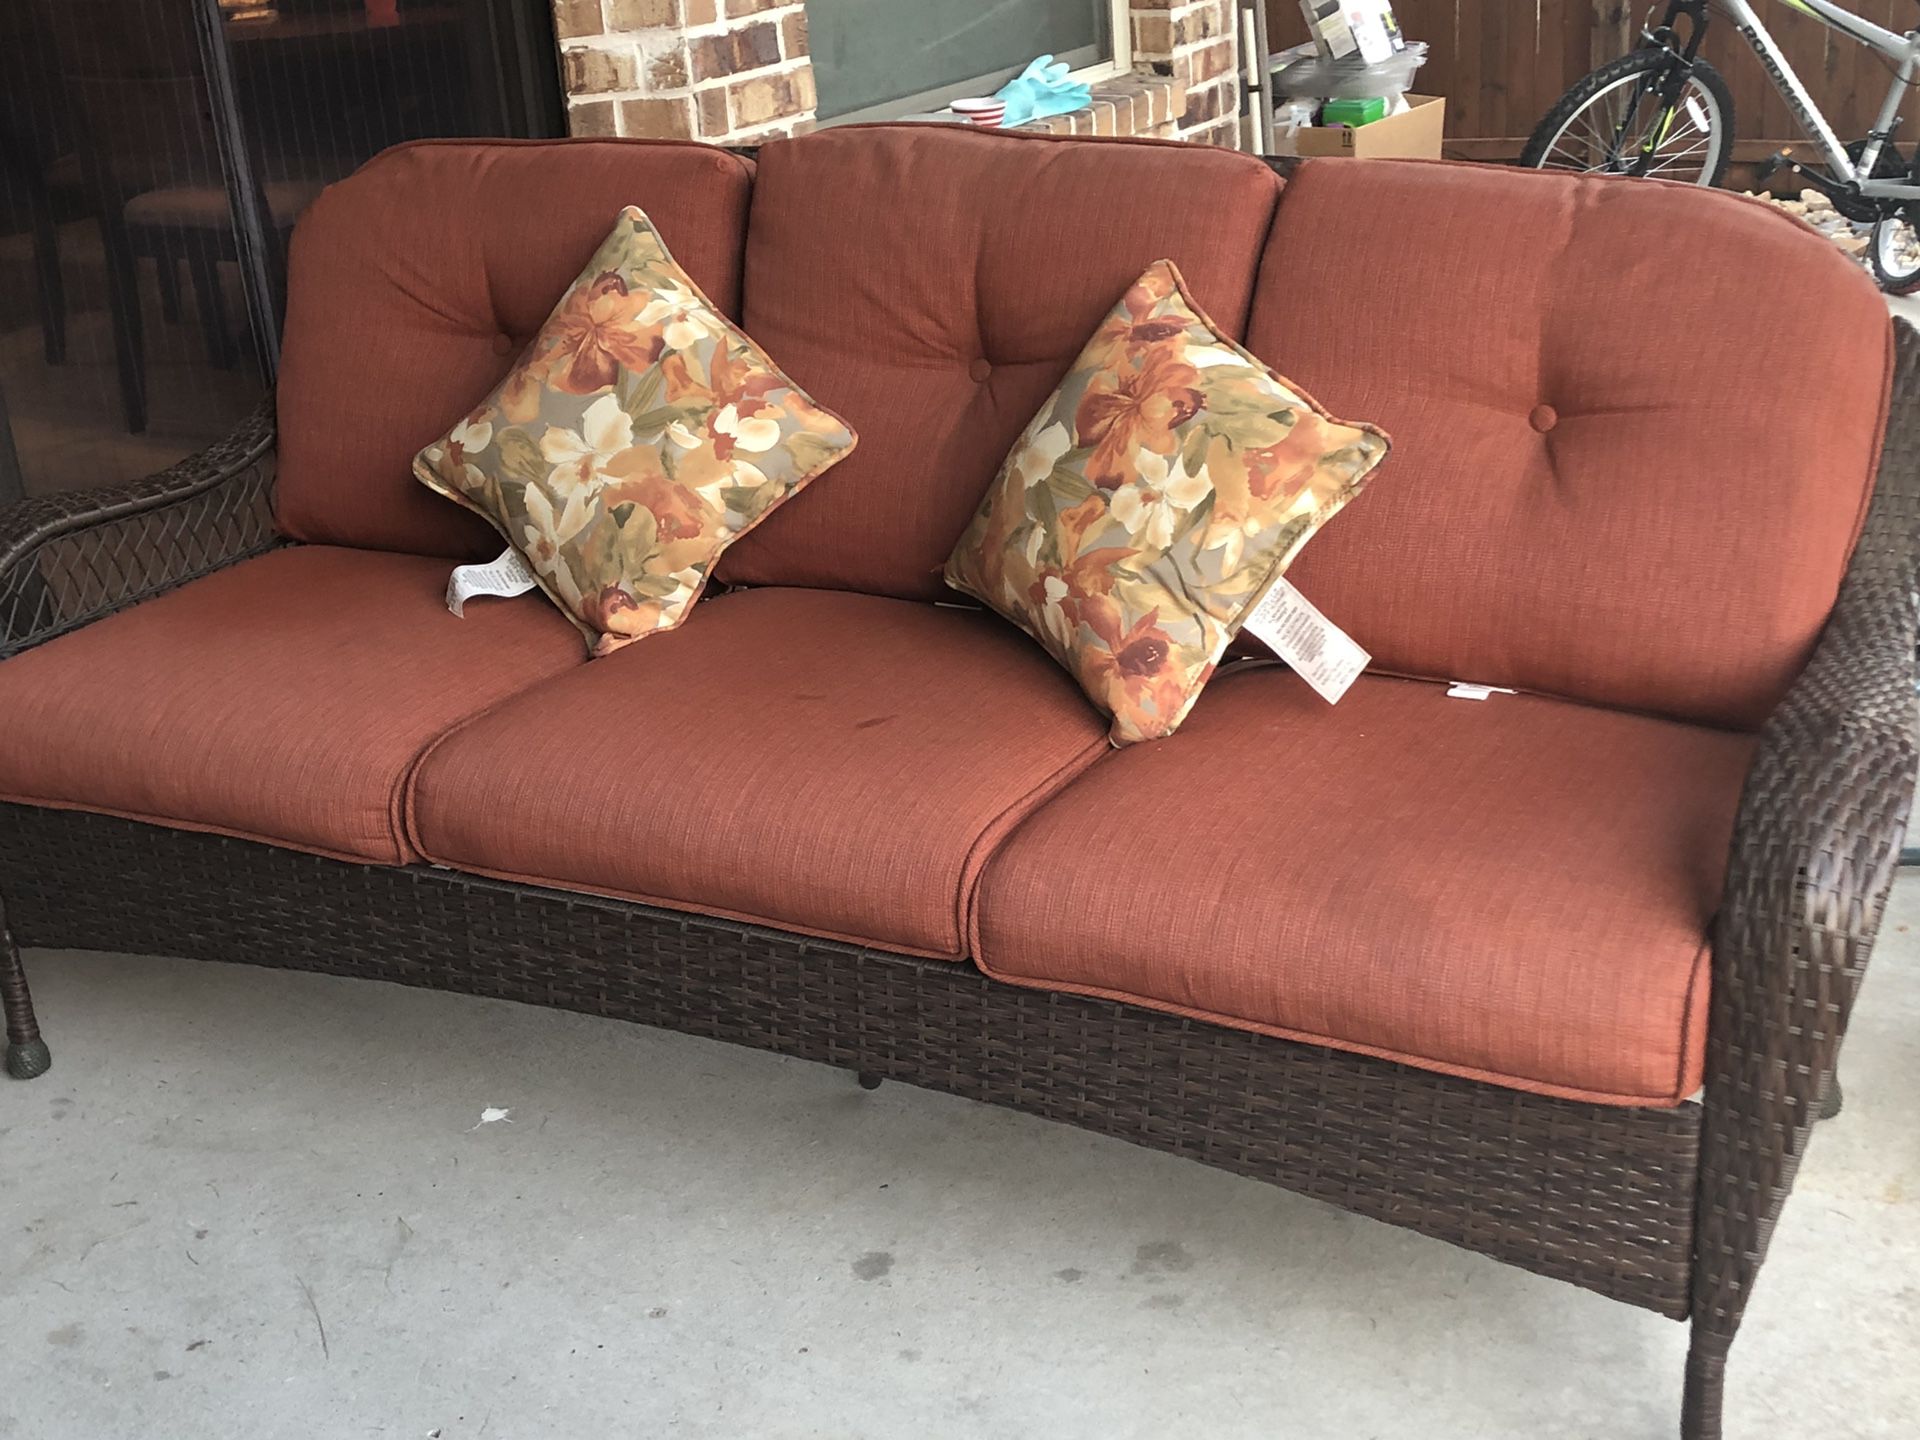 3 seater outdoor furniture- never used